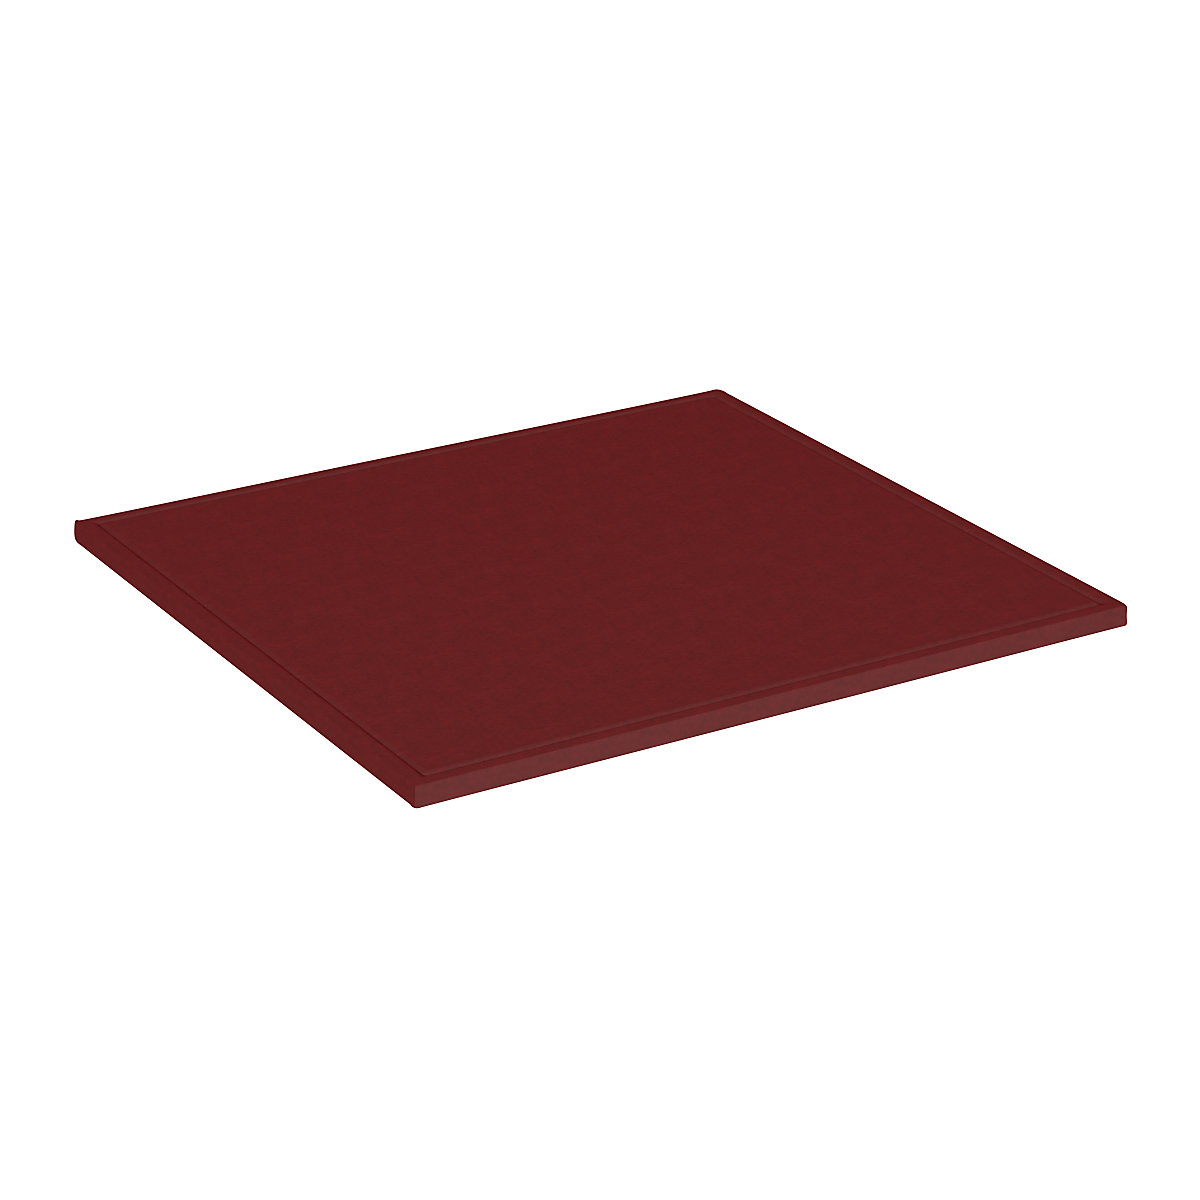 Felt seat cushion for single box – mauser, width 373 mm, red-3